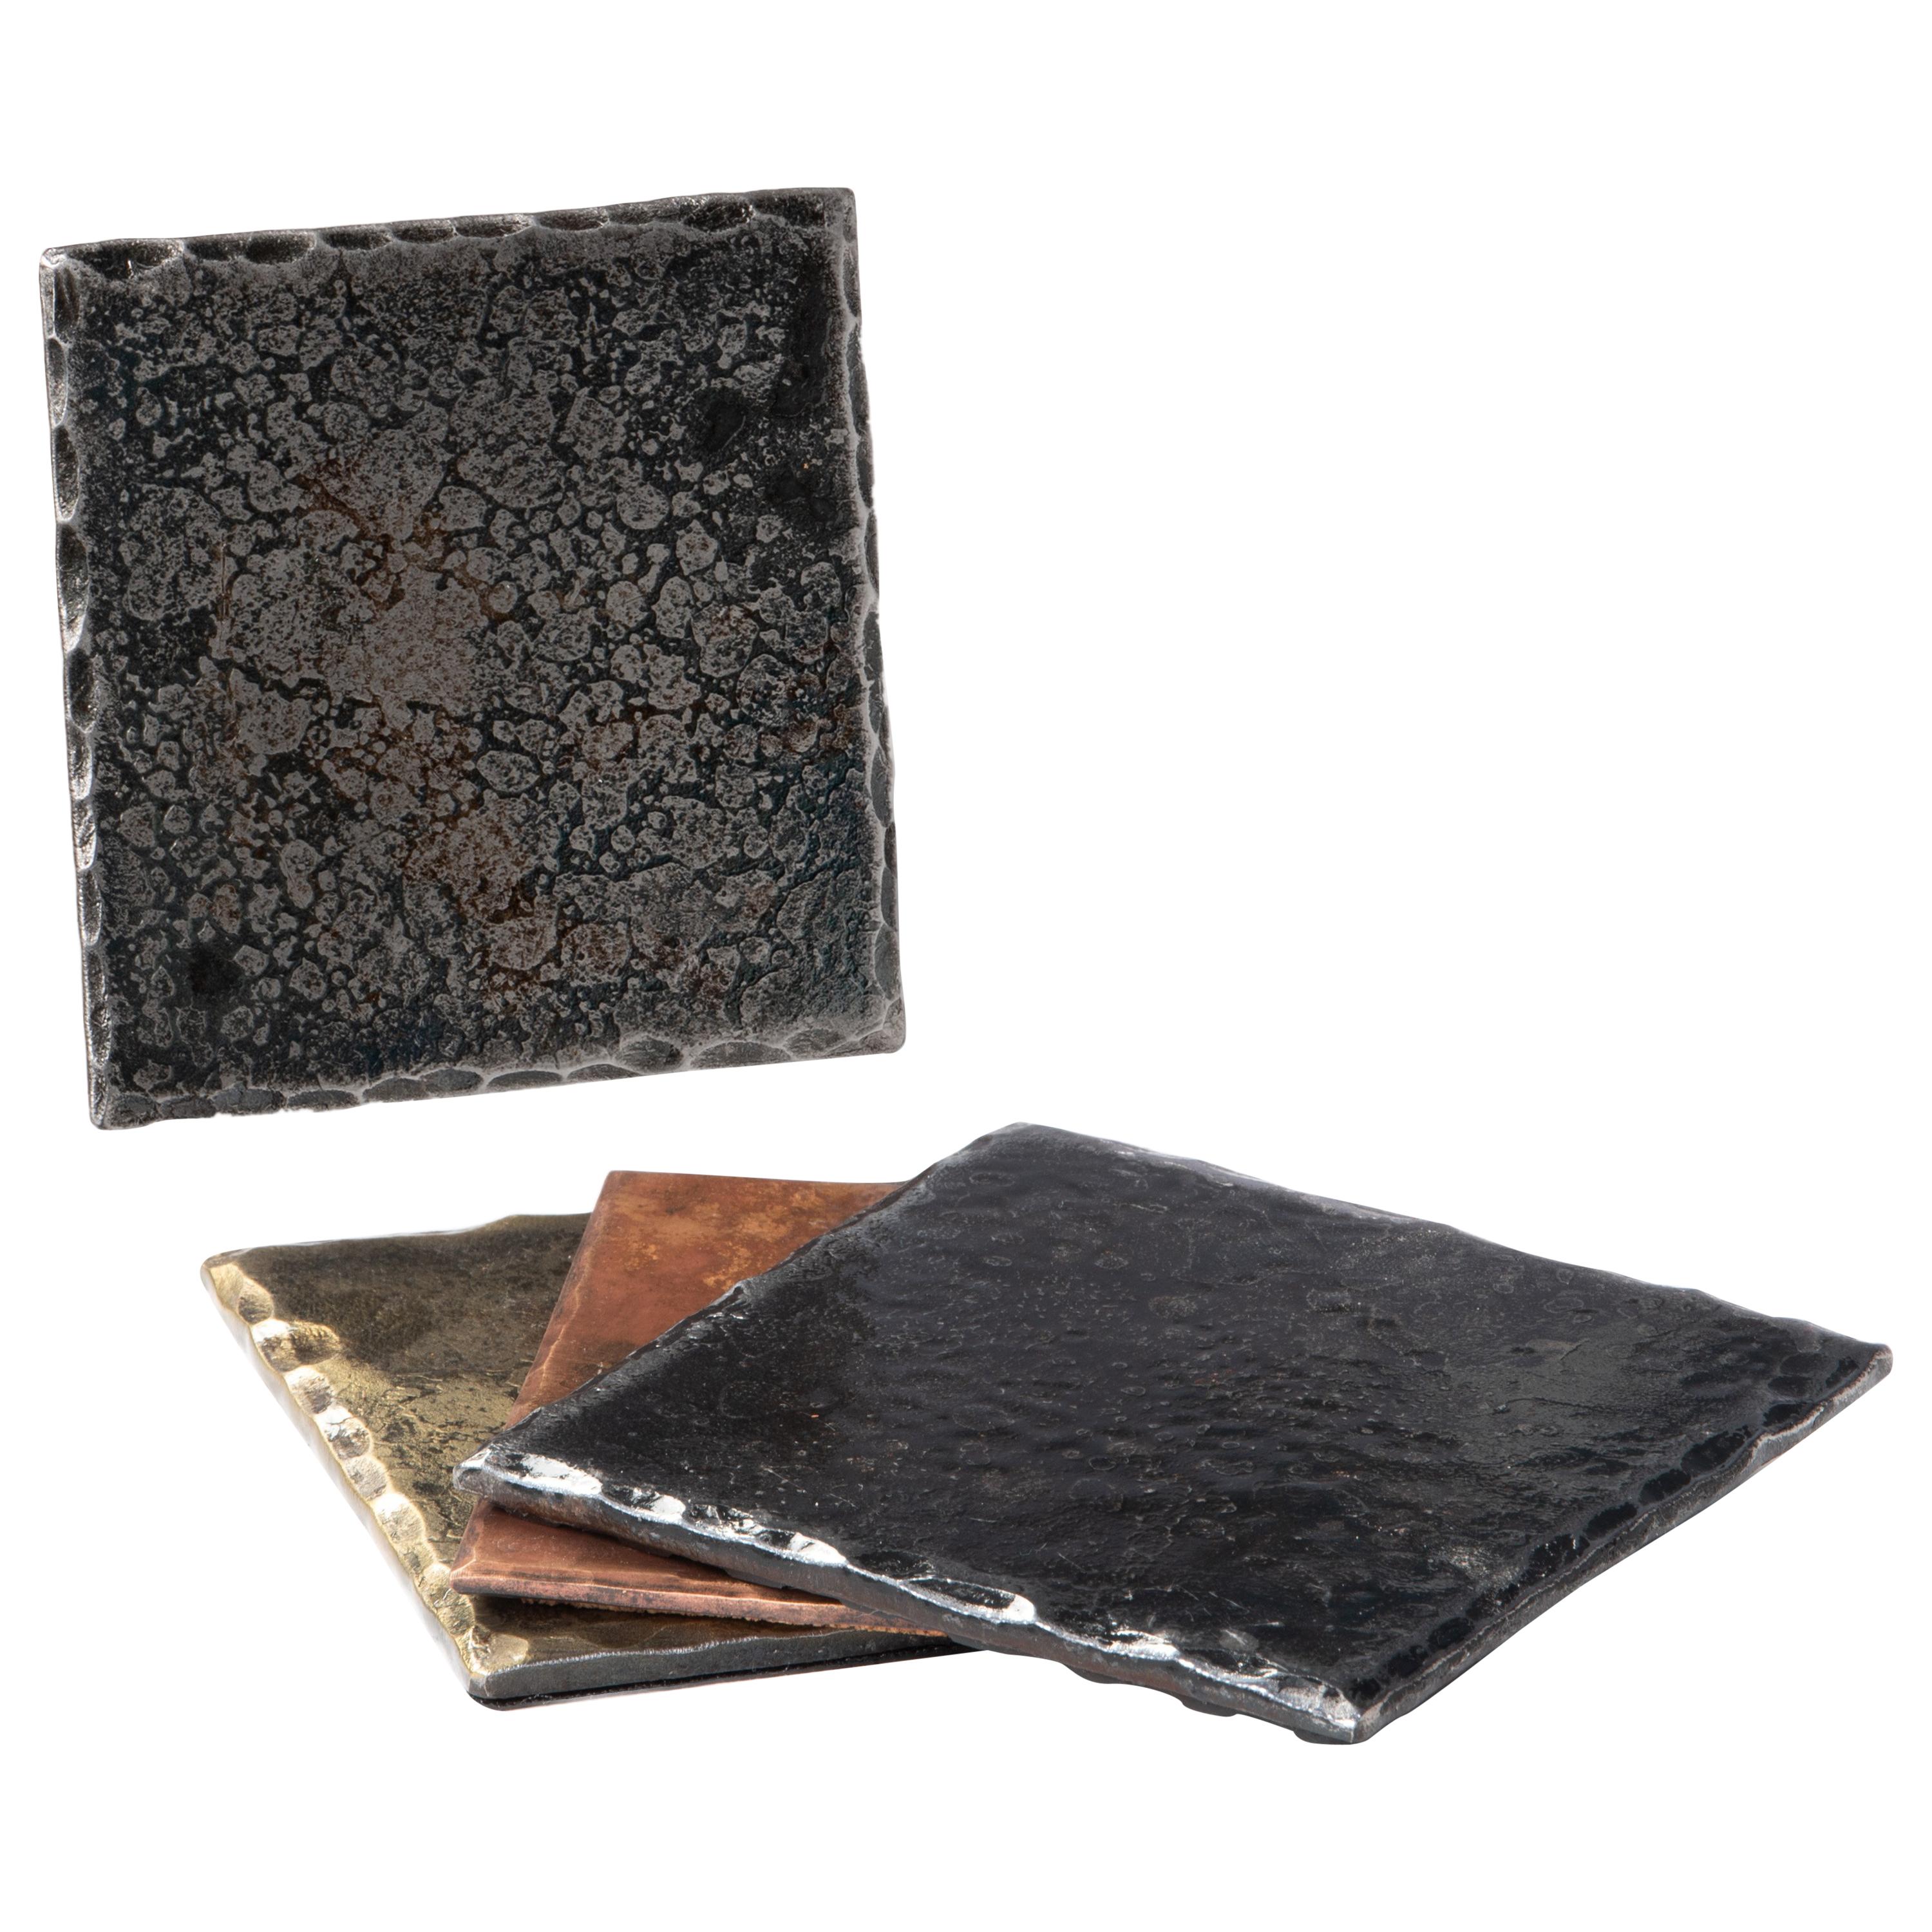 A handcrafted, steel square coaster with hammered, beveled edges. Wire brushed and sanded to accentuate the forged details. A glossy clear coat enhances the richness of the finish and texture. Thin cork base. Sold as a set of 4.